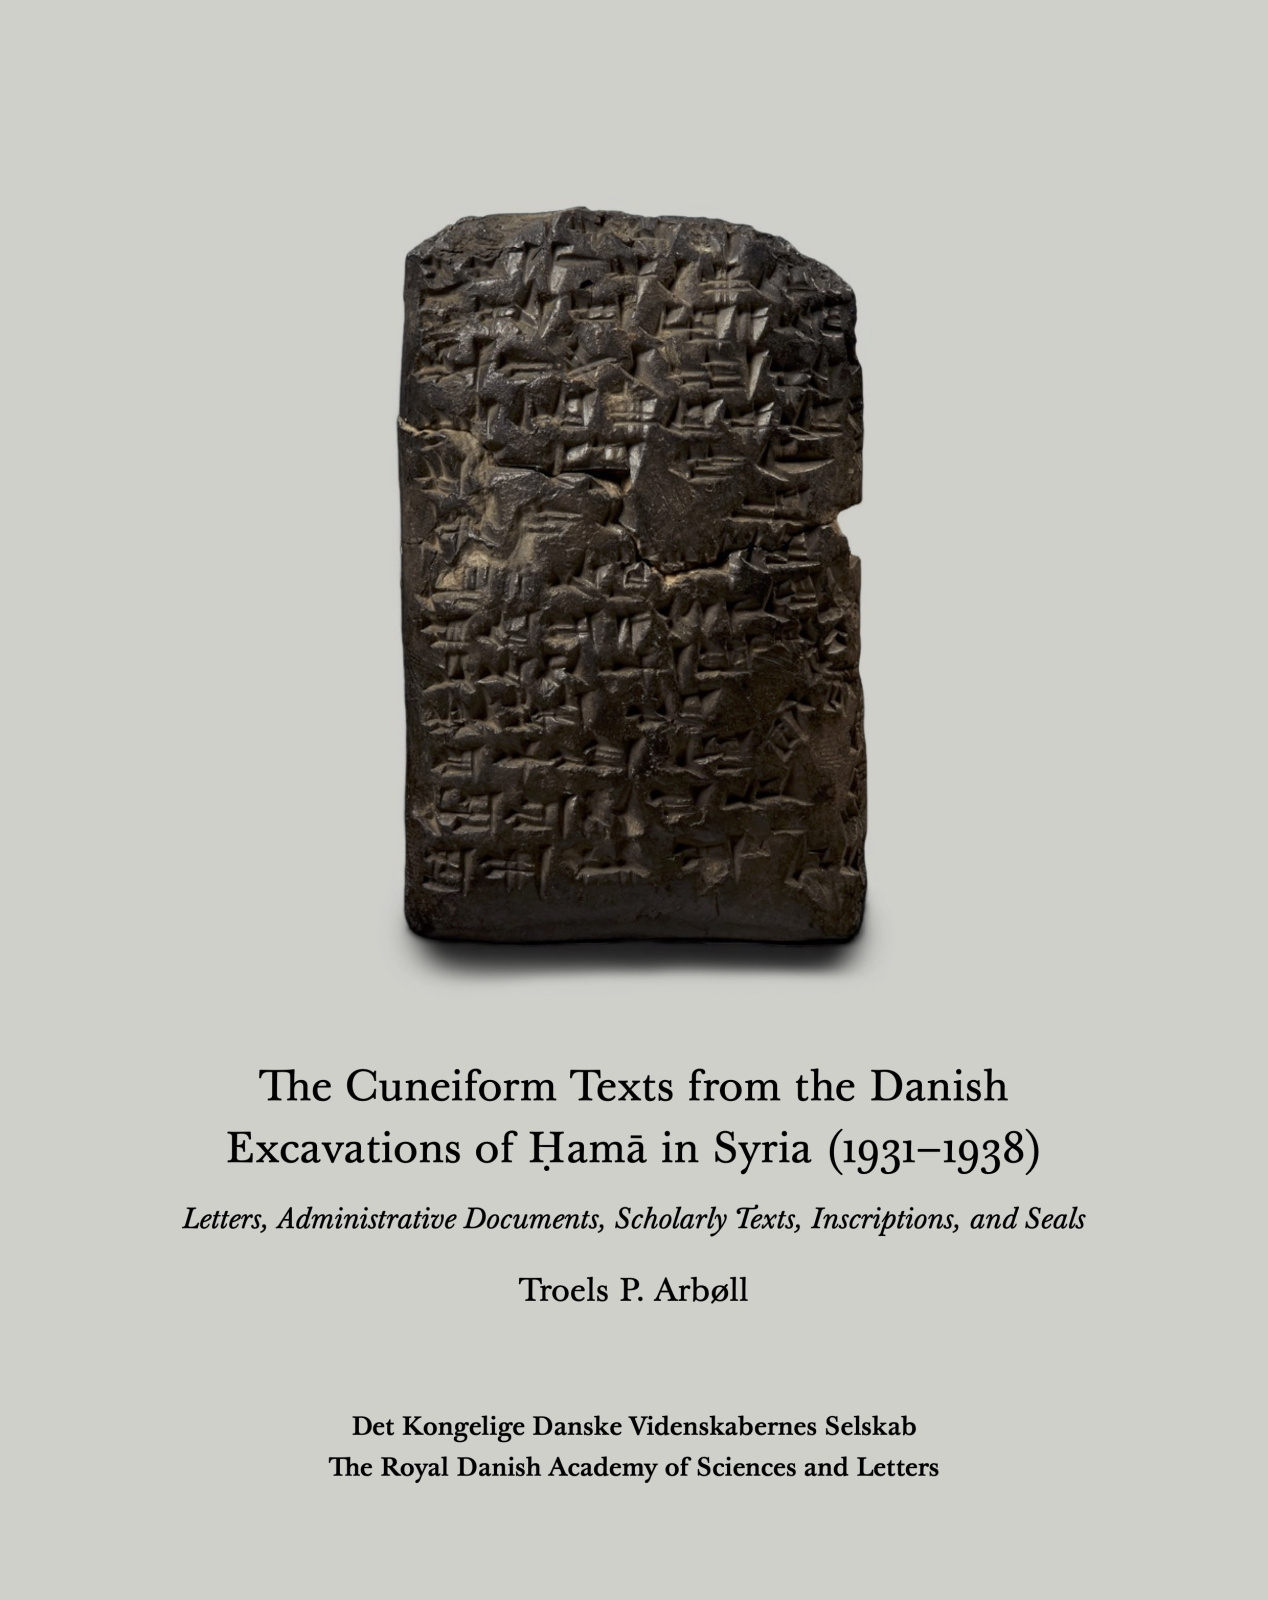 The Cuneiform Texts from the Danish Excavations of Hama in Syria (1931-1938)